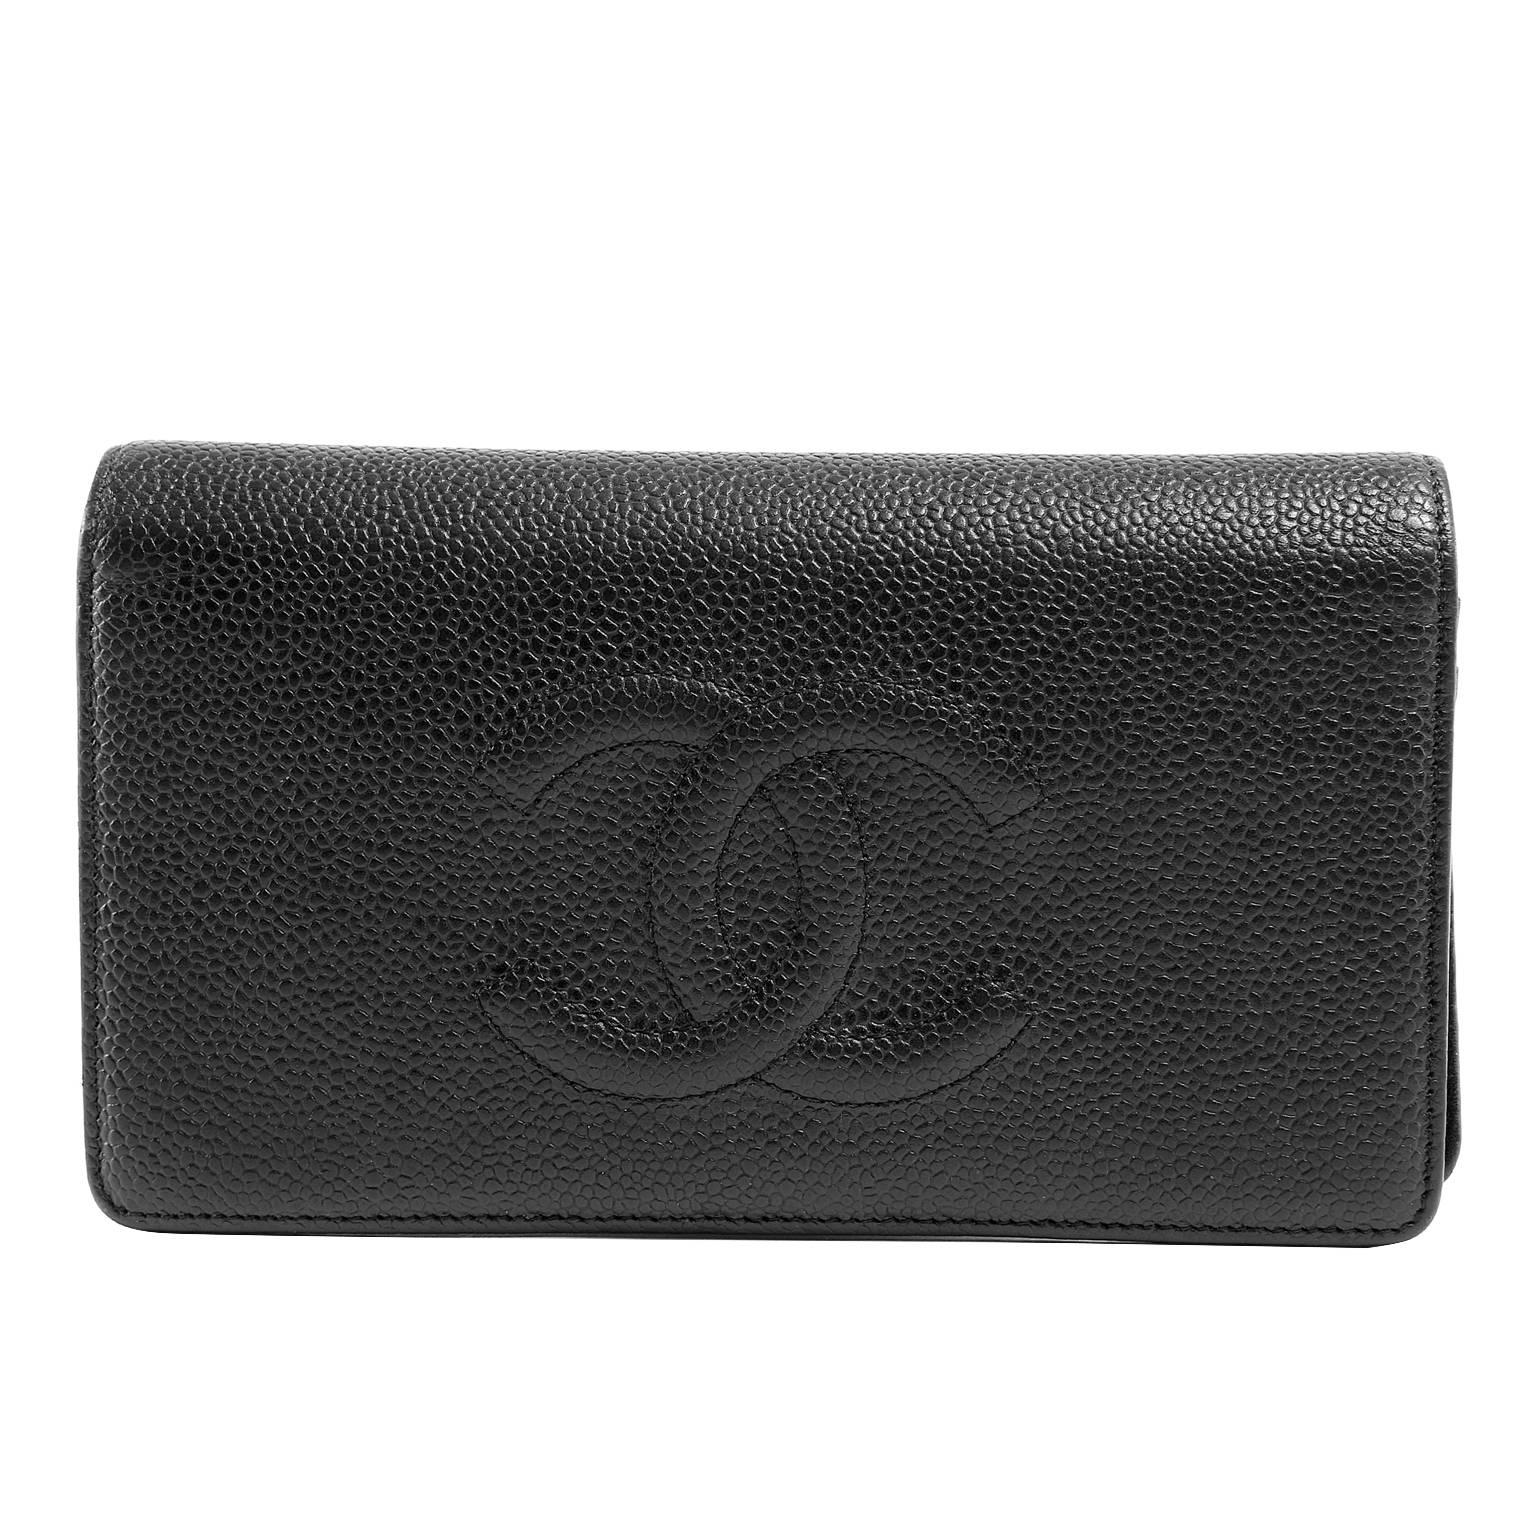 Chanel Black Caviar Large Bifold Wallet For Sale